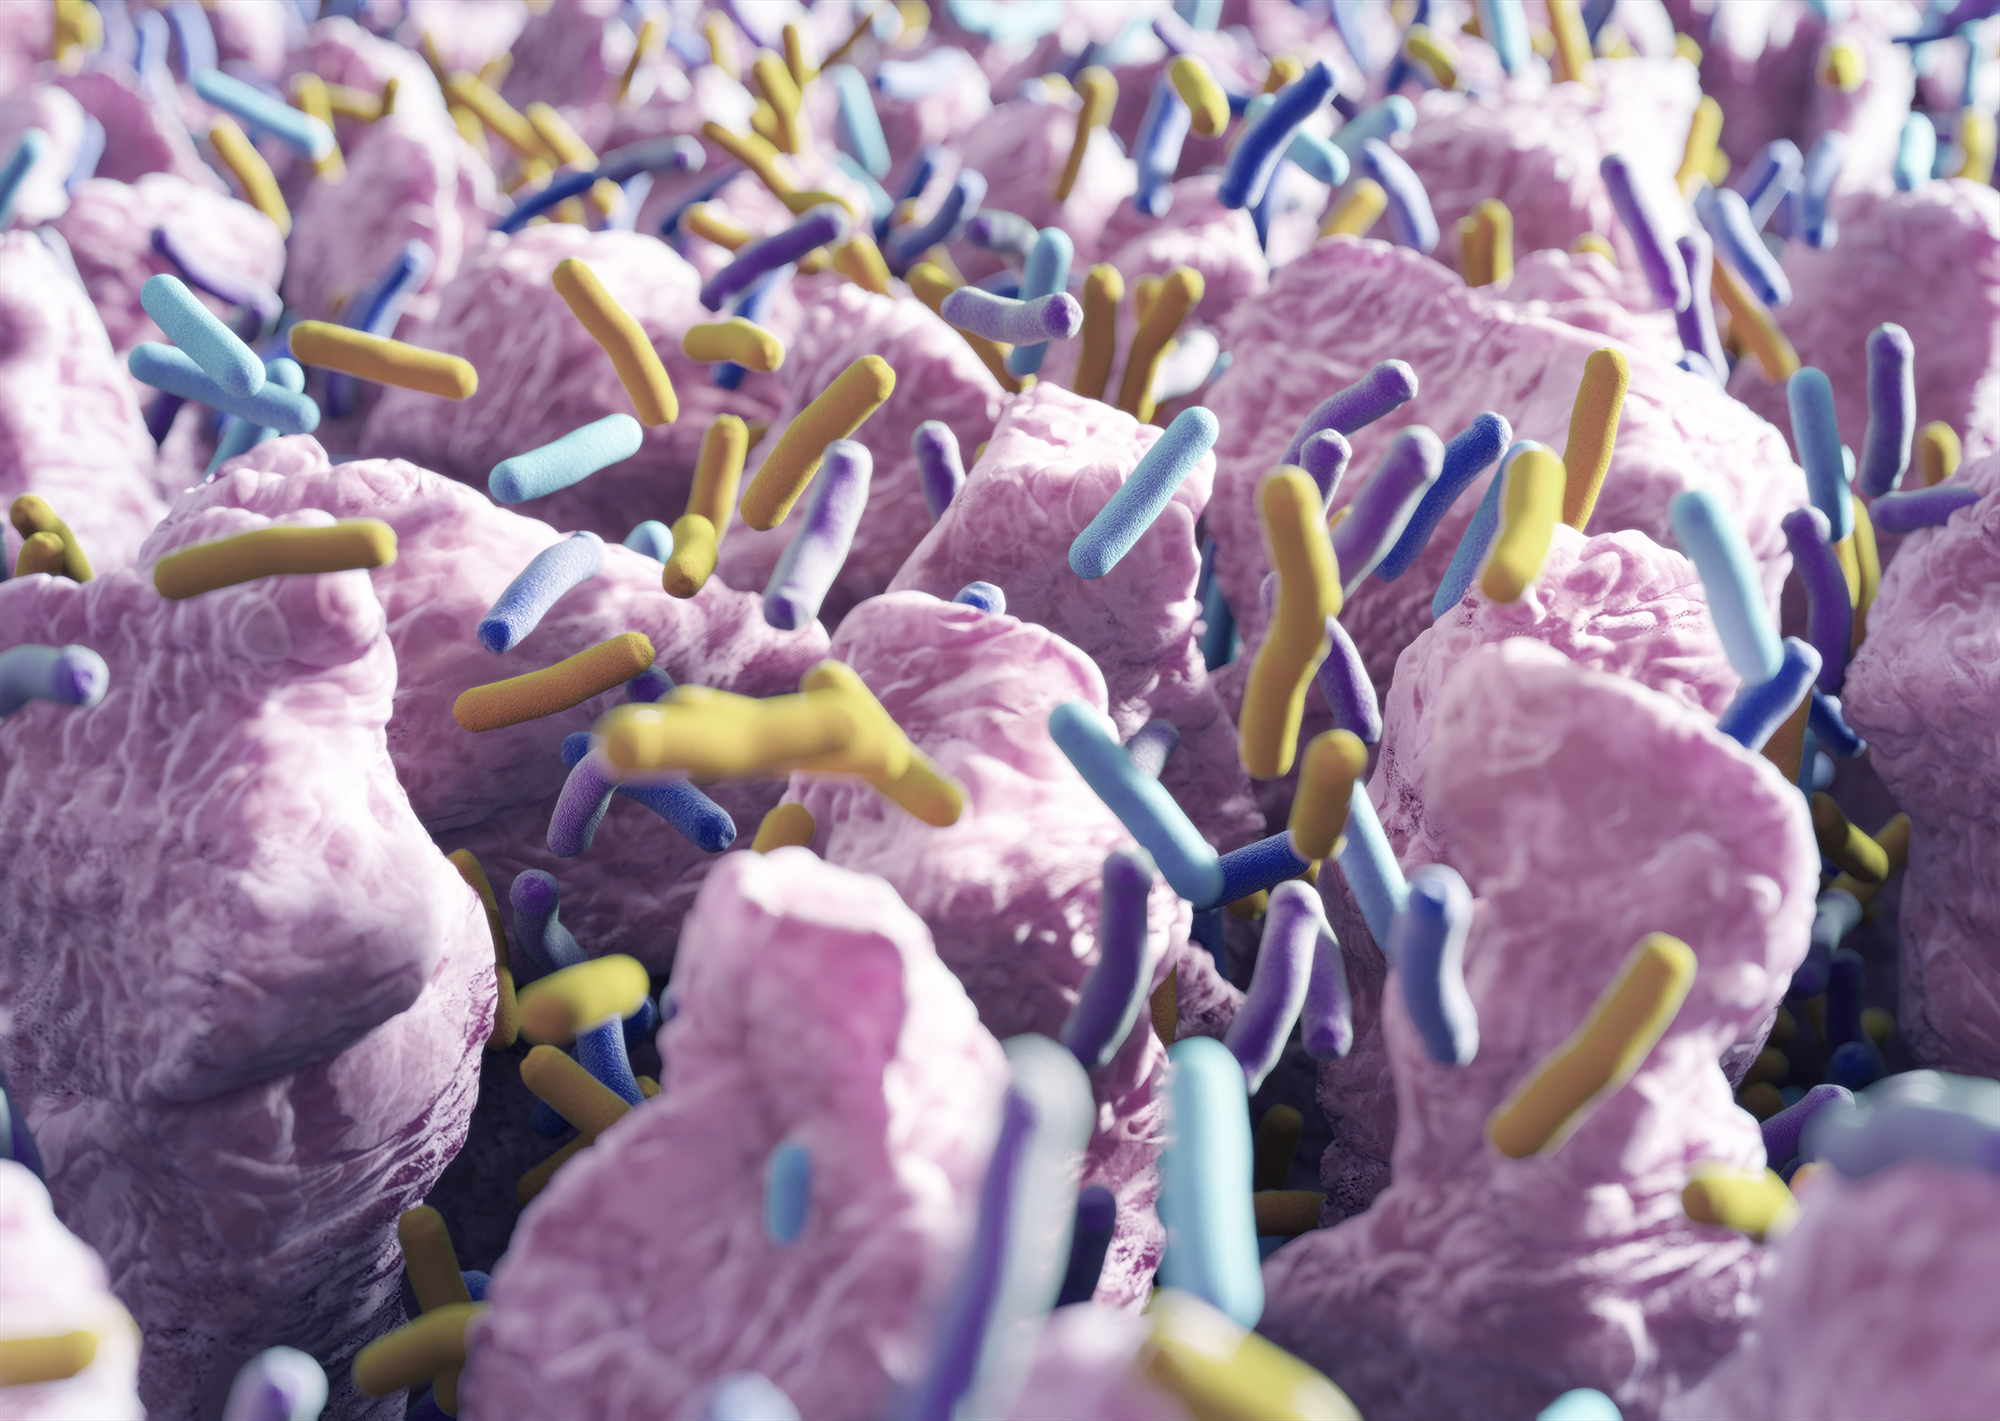 Artist rendering of intestinal villi (small finger-like projections) and gut bacteria.